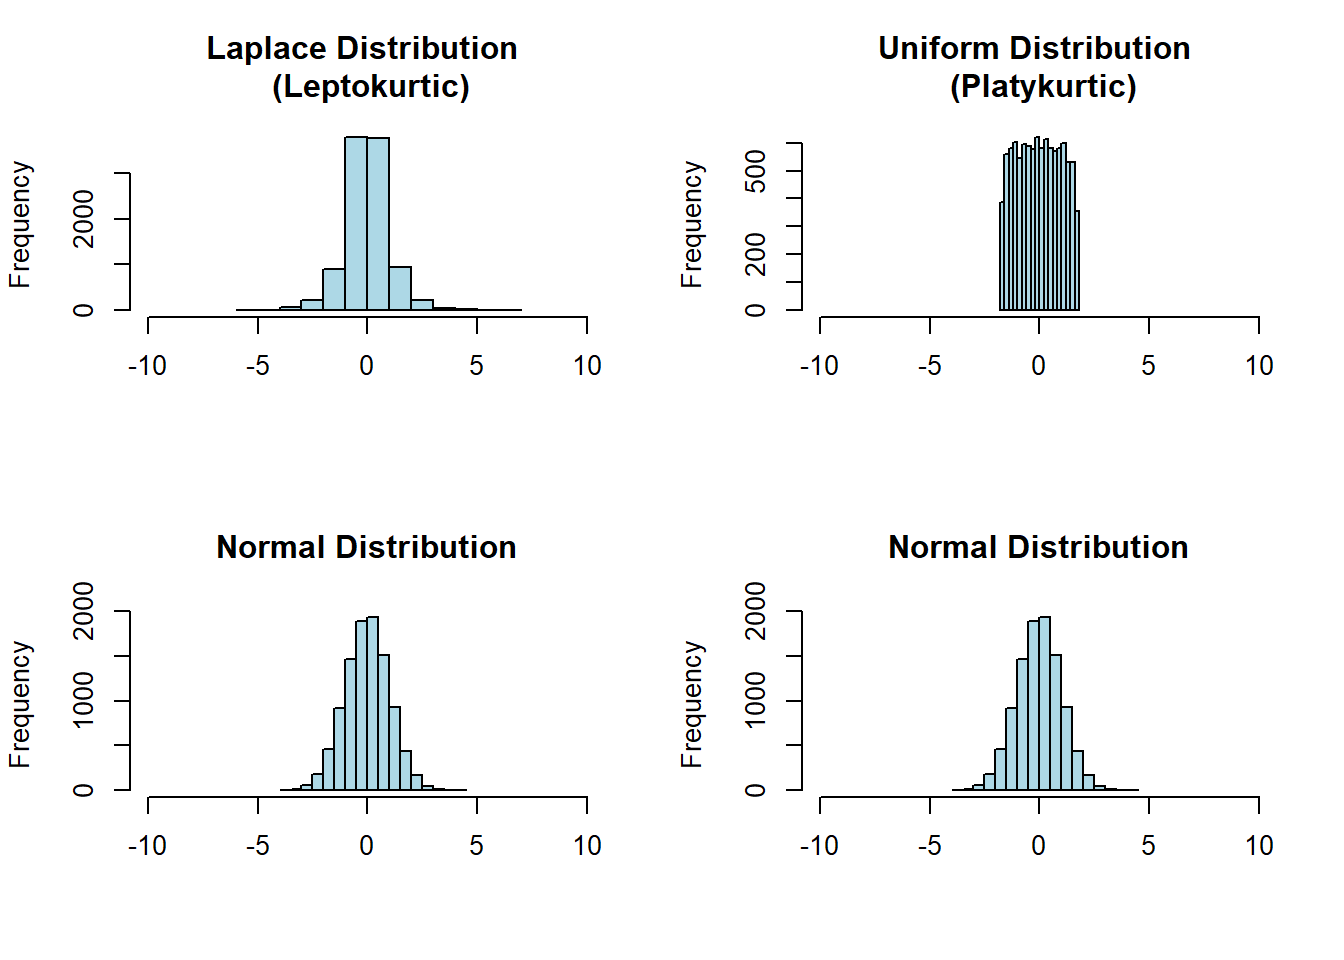 The Laplace distribution (top left) is leptokurtic because it has more data in its tails than the normal distribution with the same mean and variance. The uniform distribution (top right) is platykurtic because it has less data in its tails than the normal distribution with the same mean and variance (it effectively has no tails).